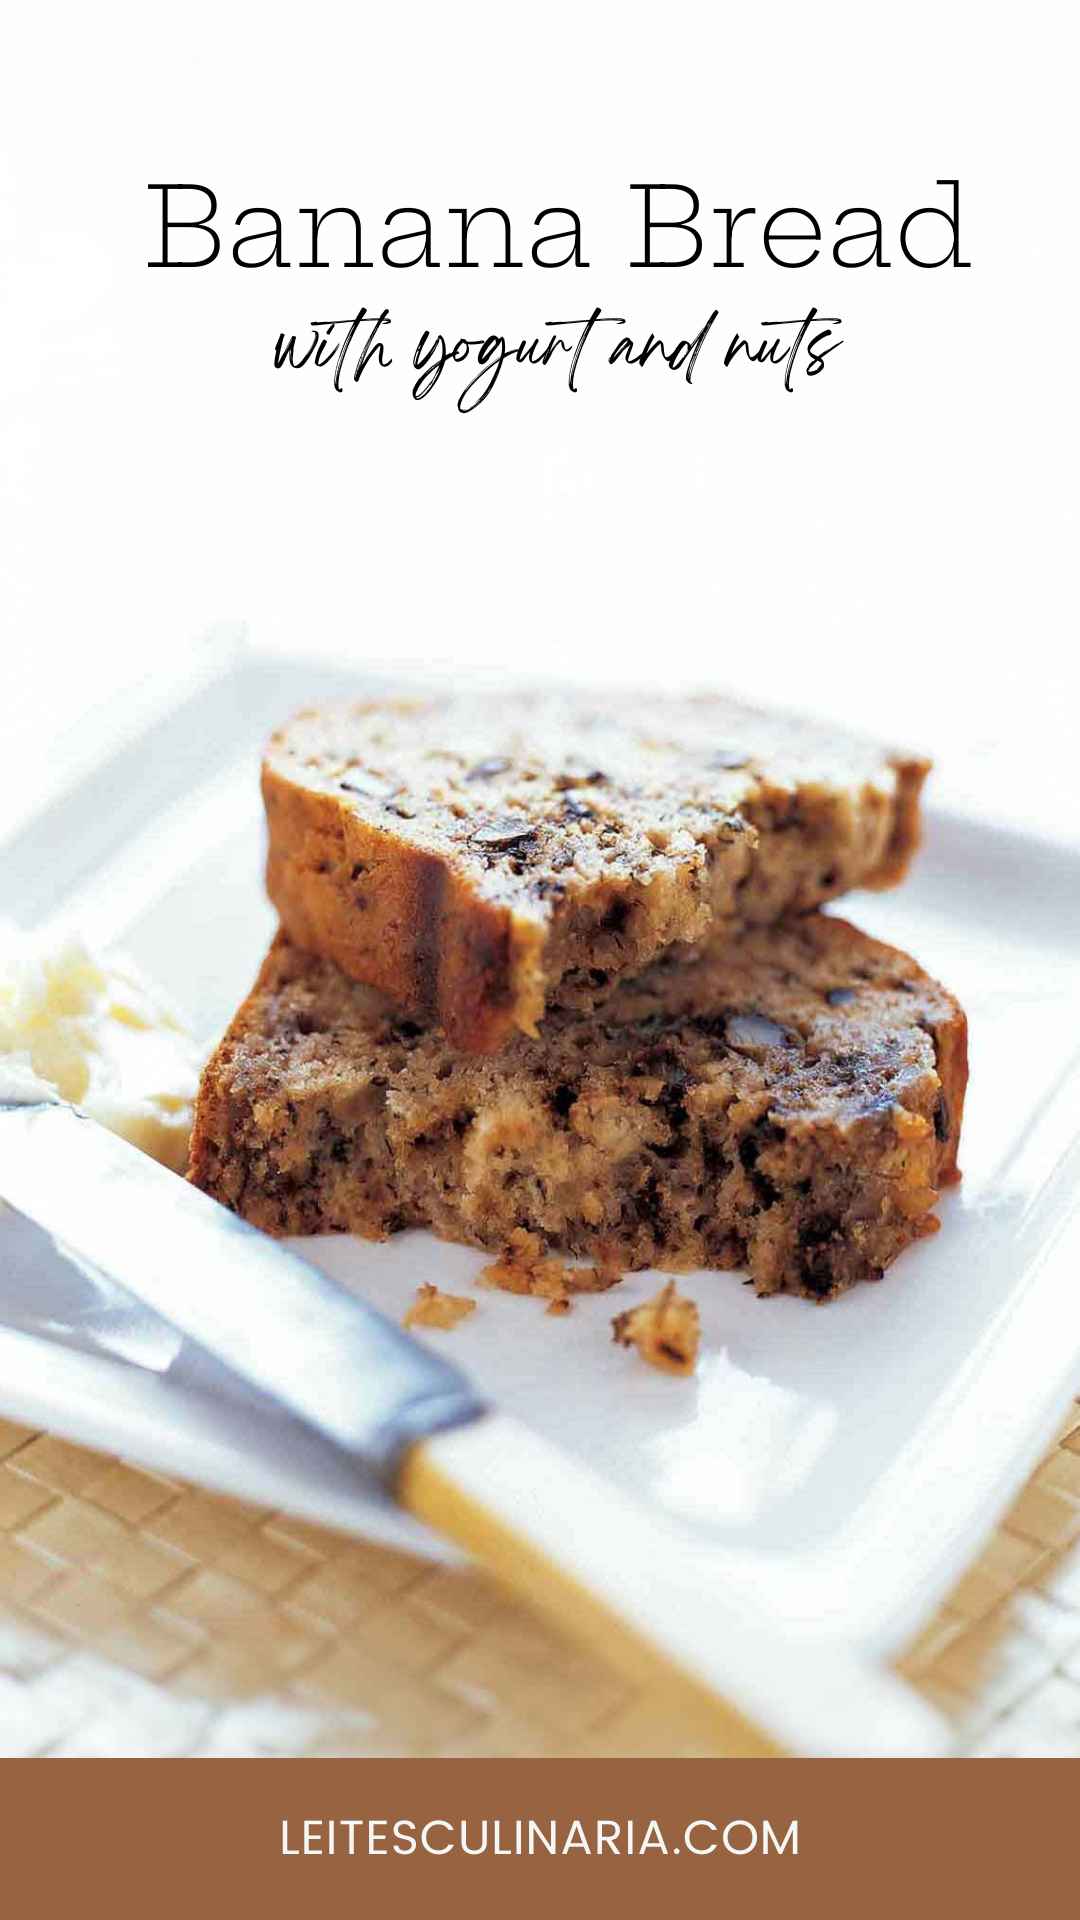 A piece of banana bread broken in half and the halves stacked on top of each other on a white plate.